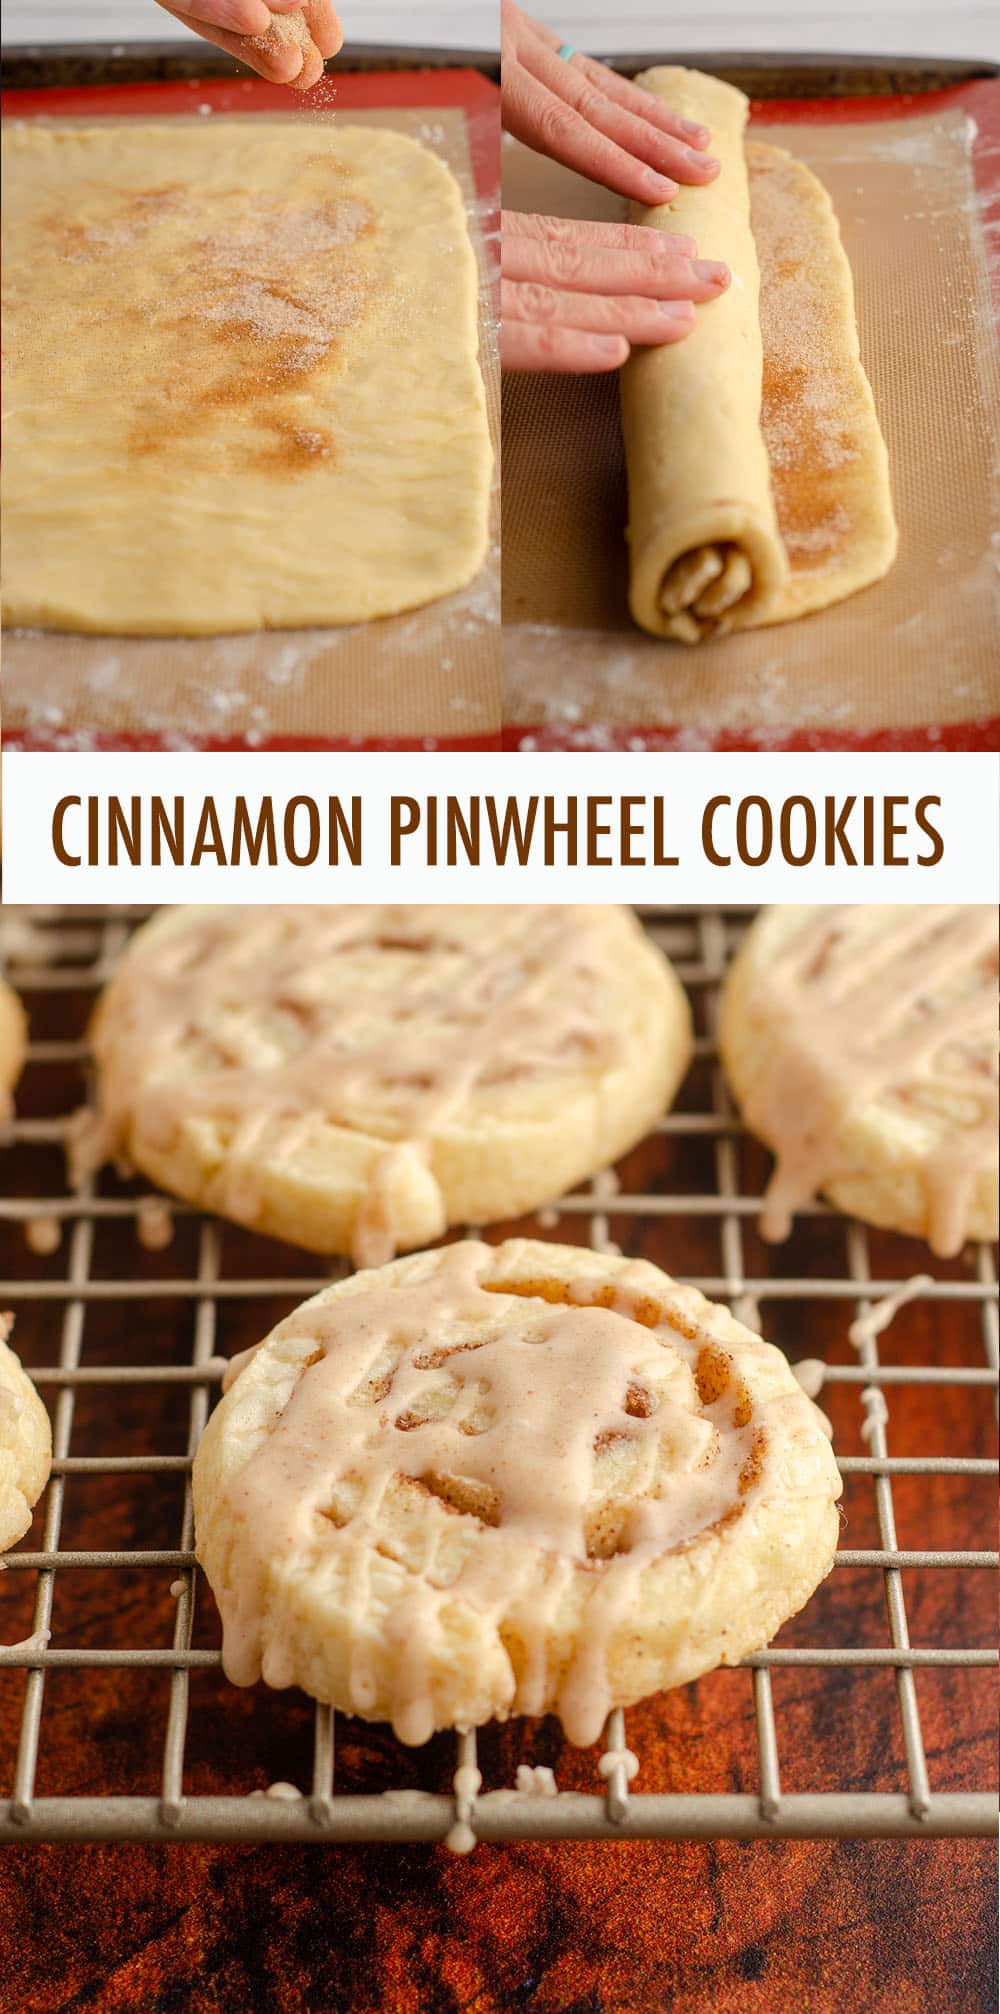 Simple sugar cookie dough filled with spicy cinnamon sugar and rolled into pinwheels. Top them off with a cinnamon icing and you've got yourself sweet and buttery cinnamon roll cookies! via @frshaprilflours